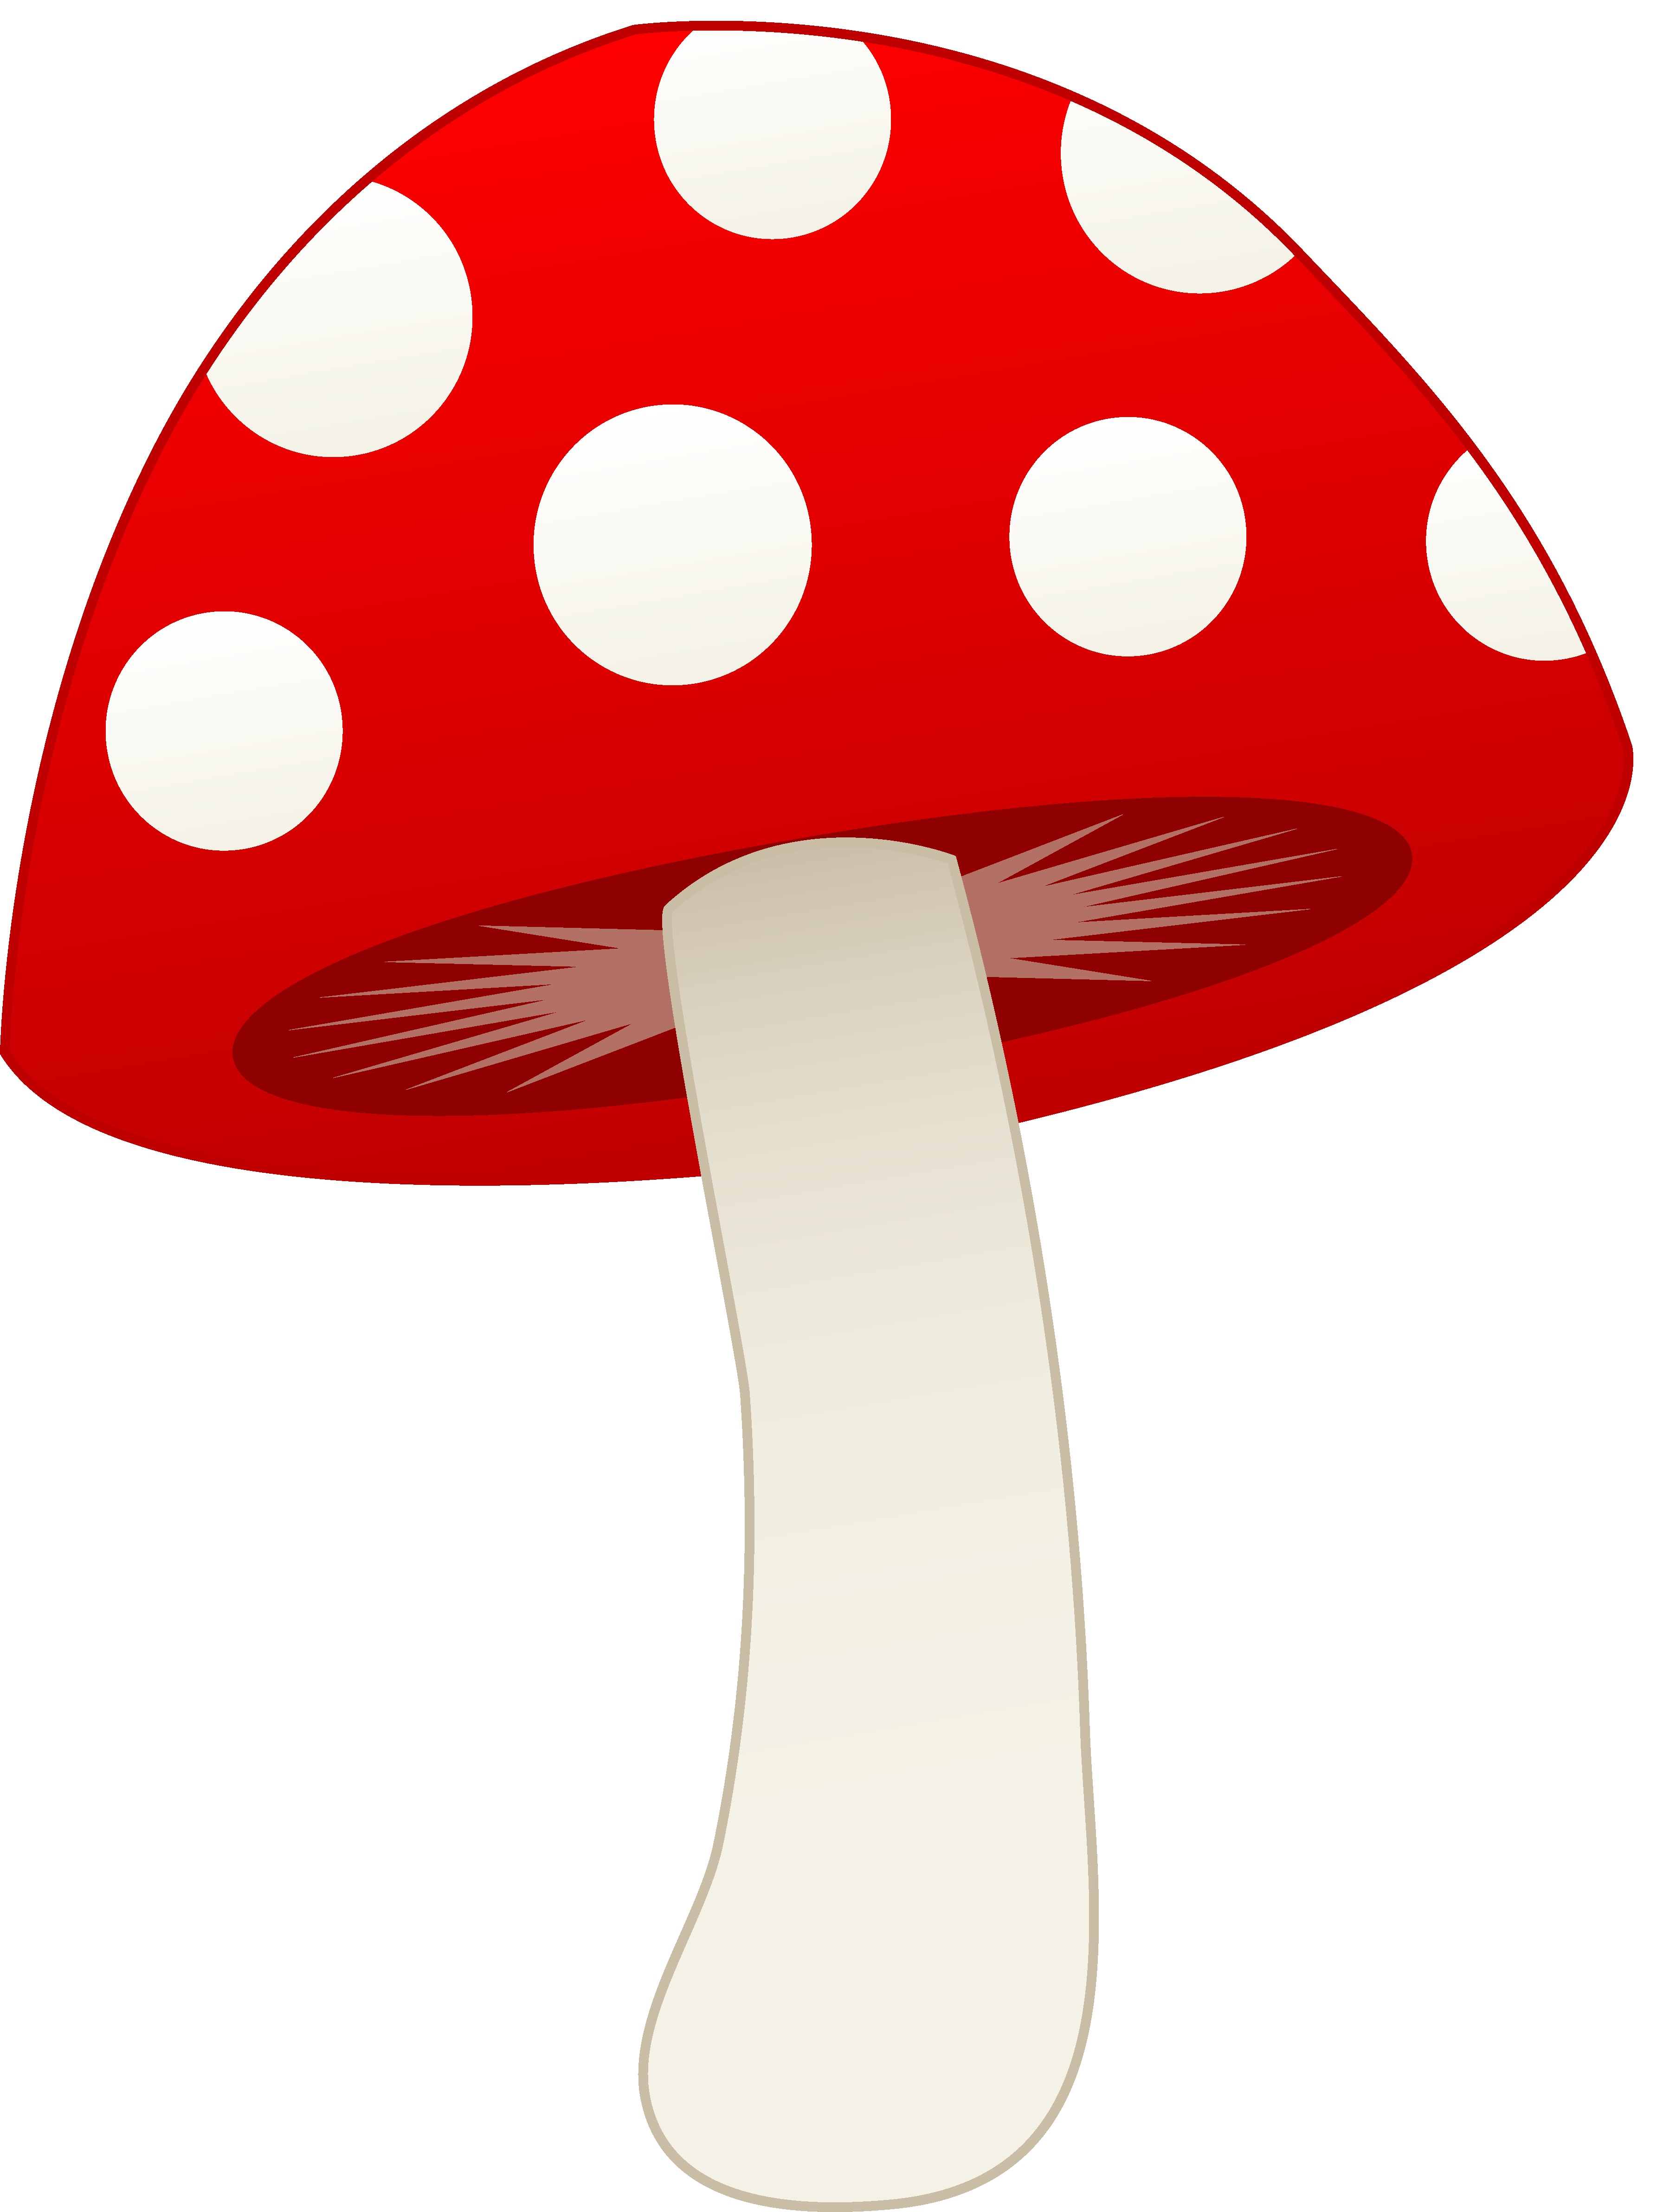 Images For > Cute Mushroom Clipart - Cliparts.co